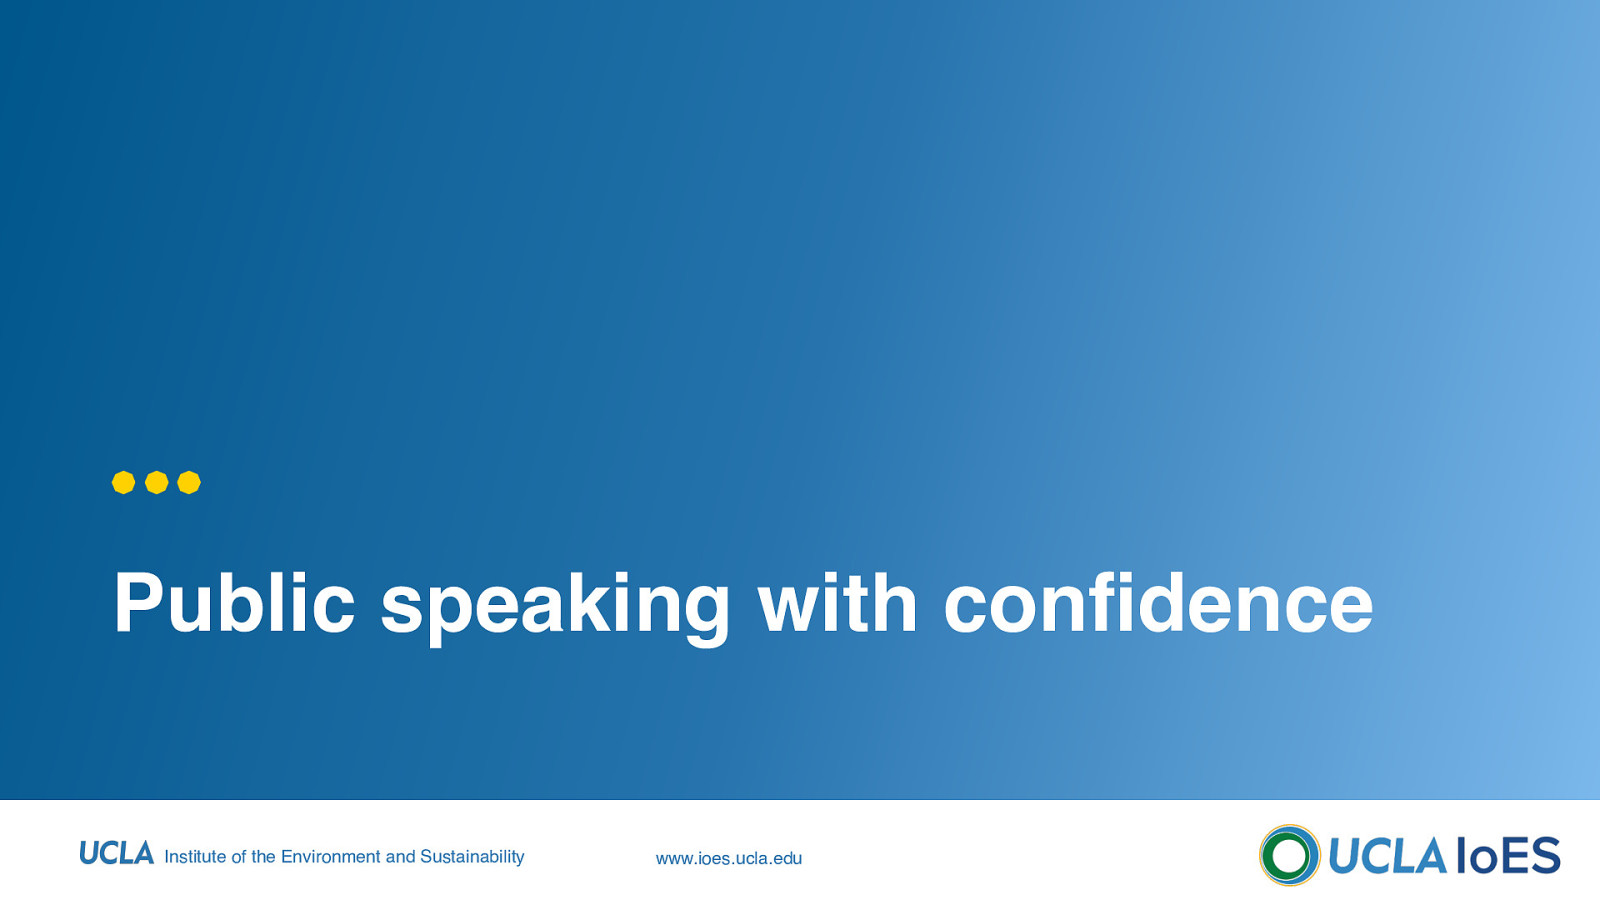 Public speaking with confidence